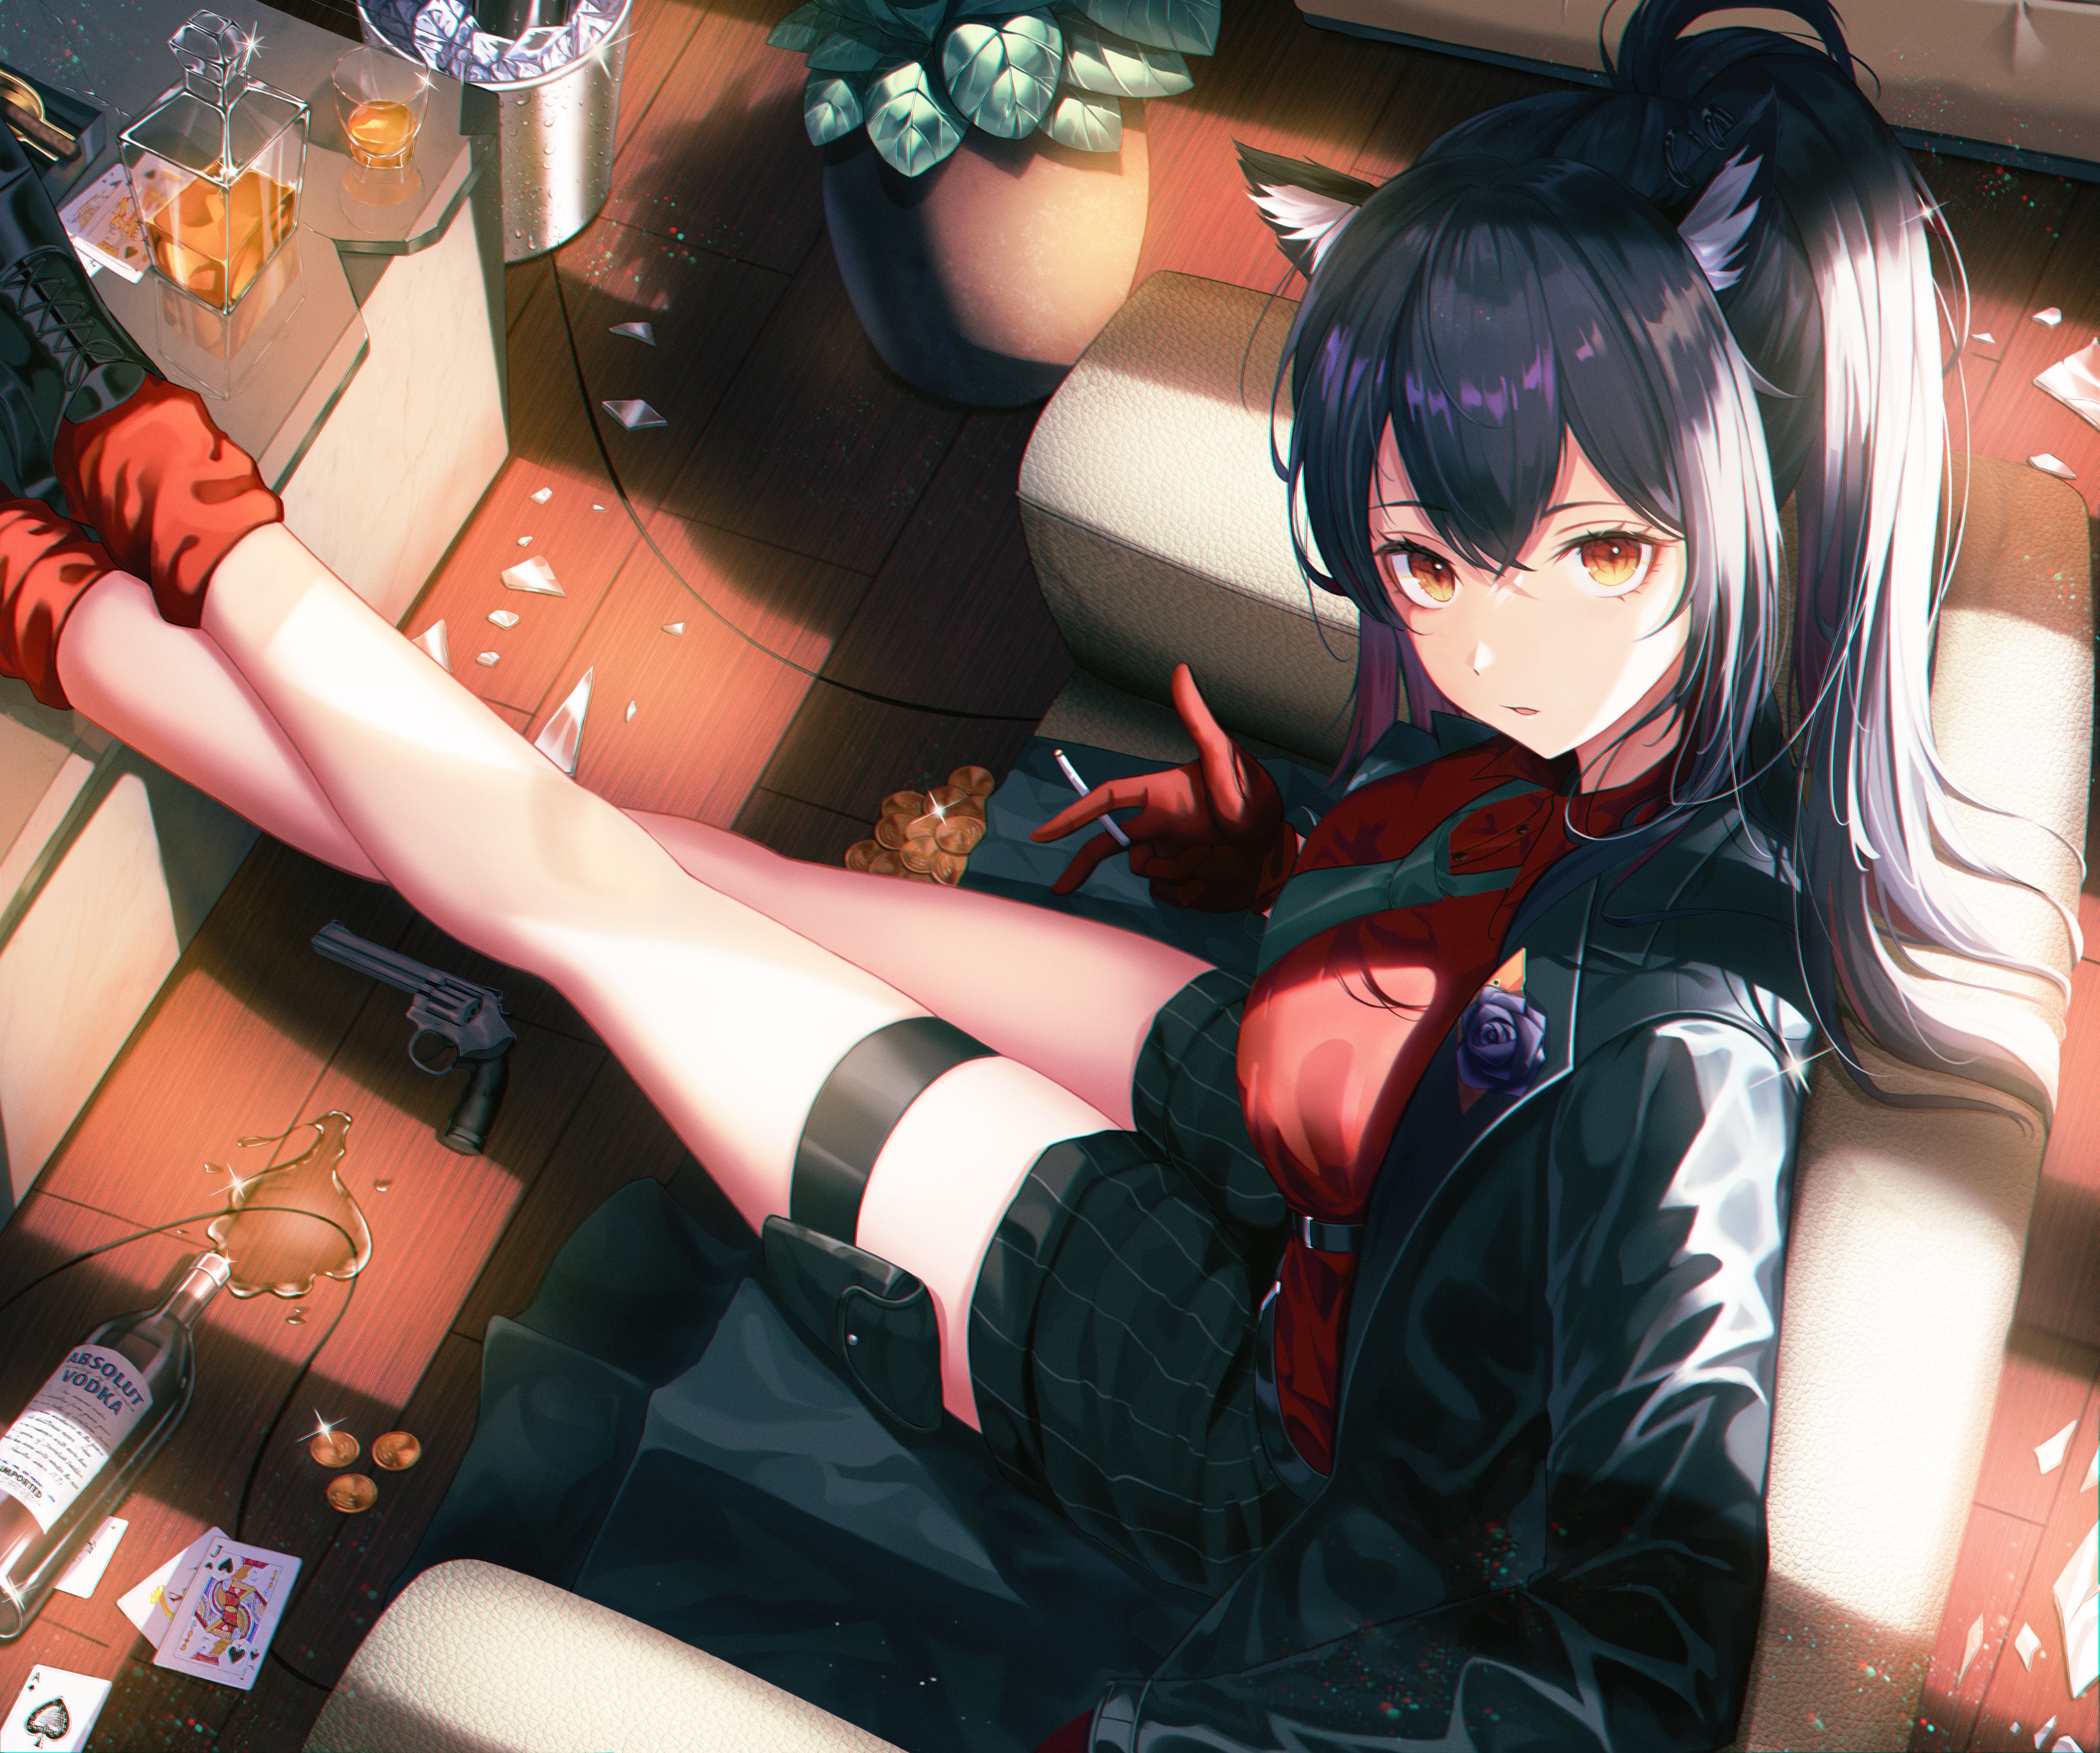 Anime 4096x3420 anime anime girls Arknights Texas (Arknights) animal ears Shaffelli wolf girls smoking cigarettes gun revolver high angle looking at viewer messy broken glass vodka spirits cards indoors women indoors women looking up legs jacket plants armchair